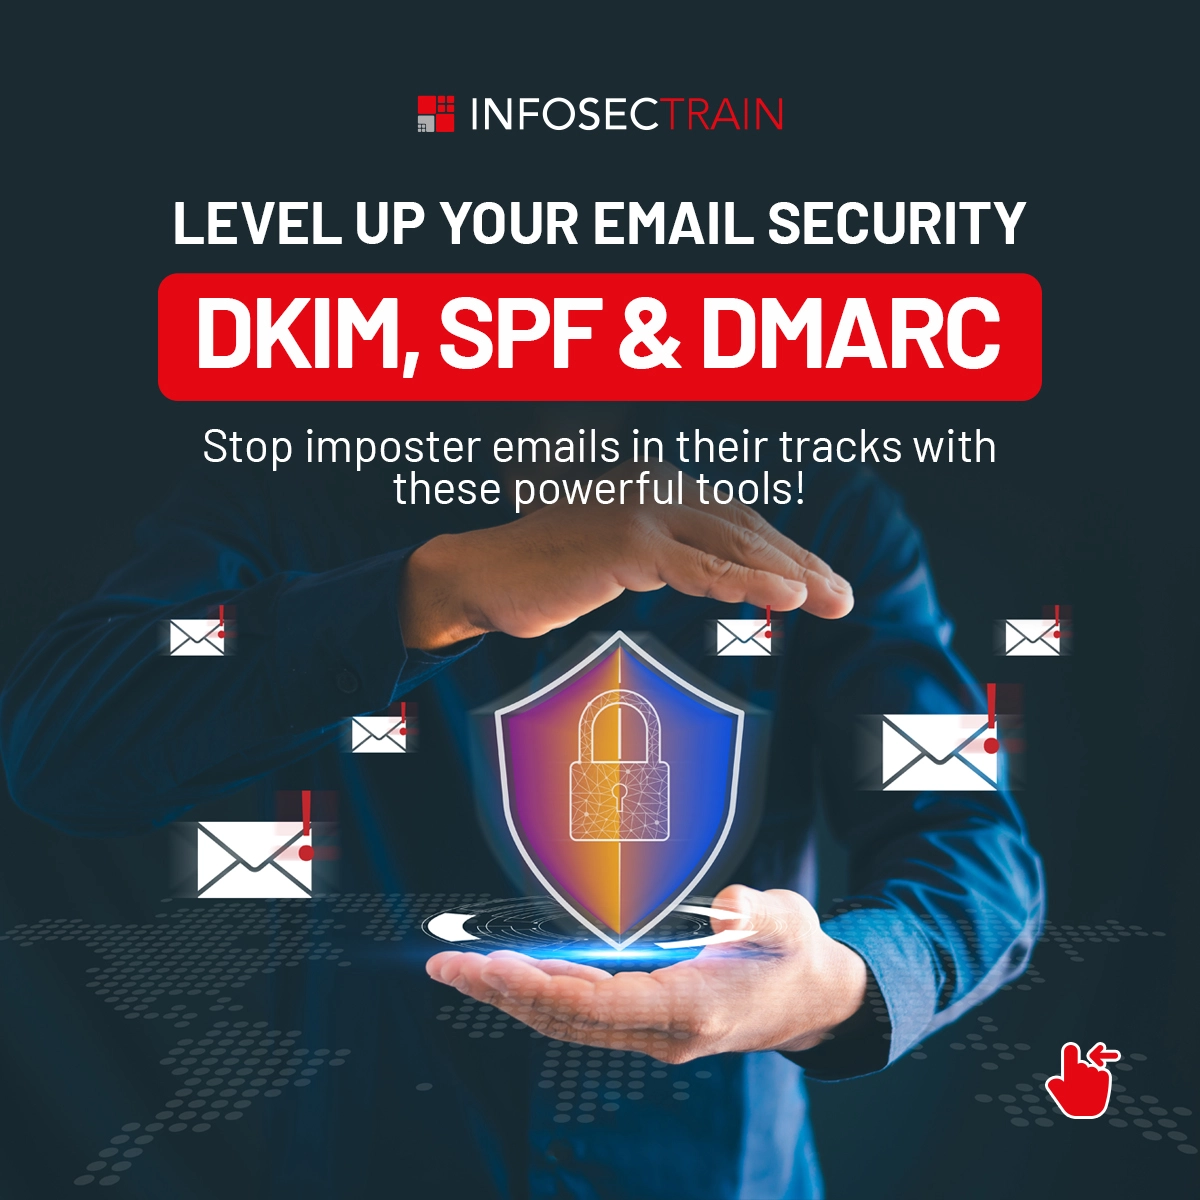 Strengthening Email Security with DKIM, SPF & DMARC